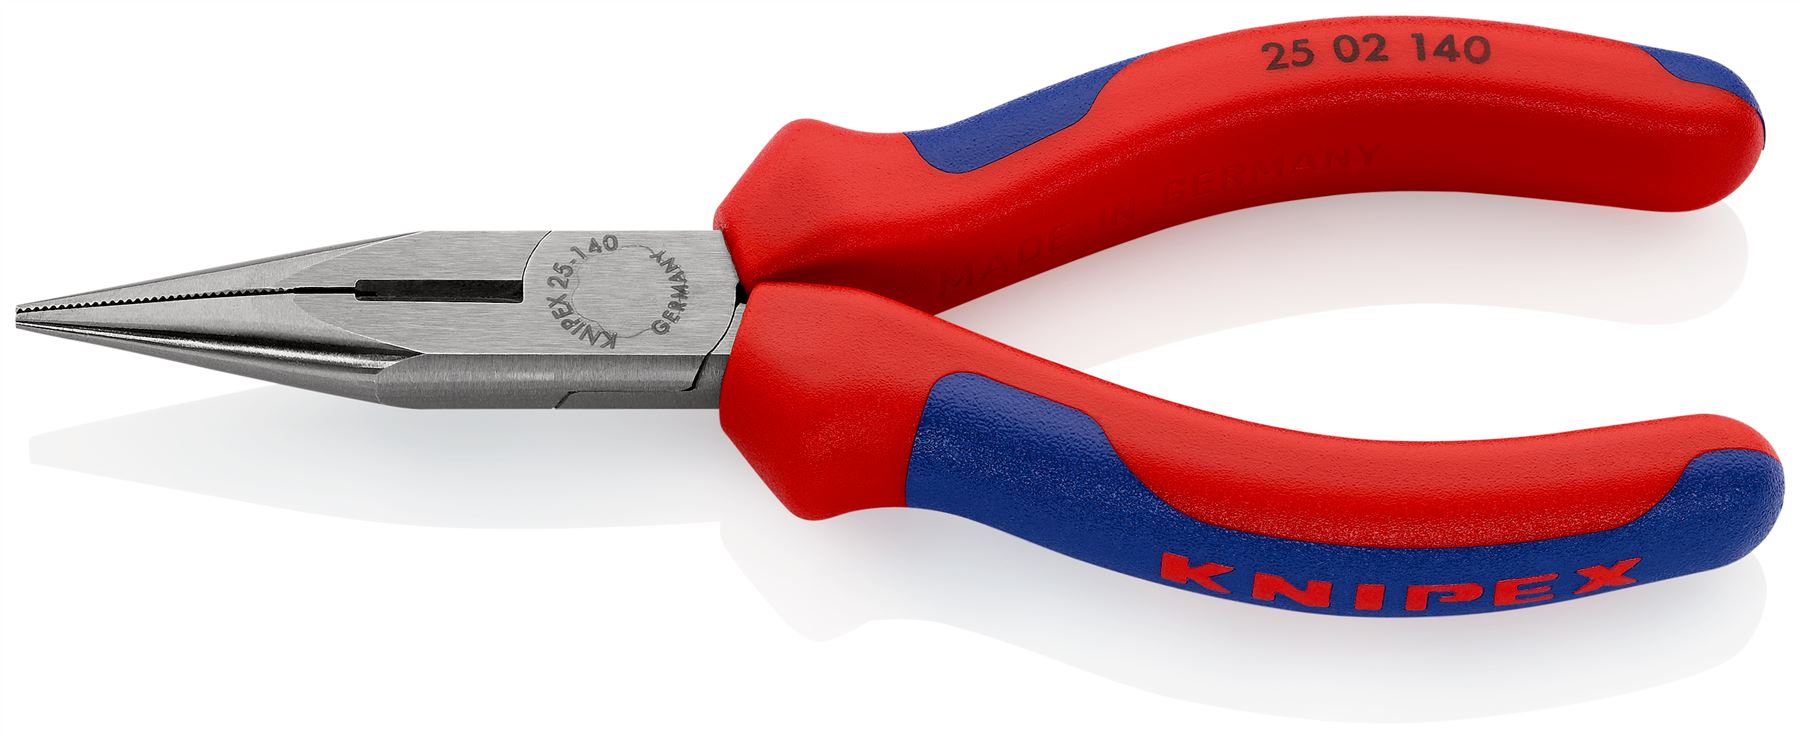 Knipex Snipe Nose Side Cutting Pliers 140mm Long Nose Radio Plier 25 02 140